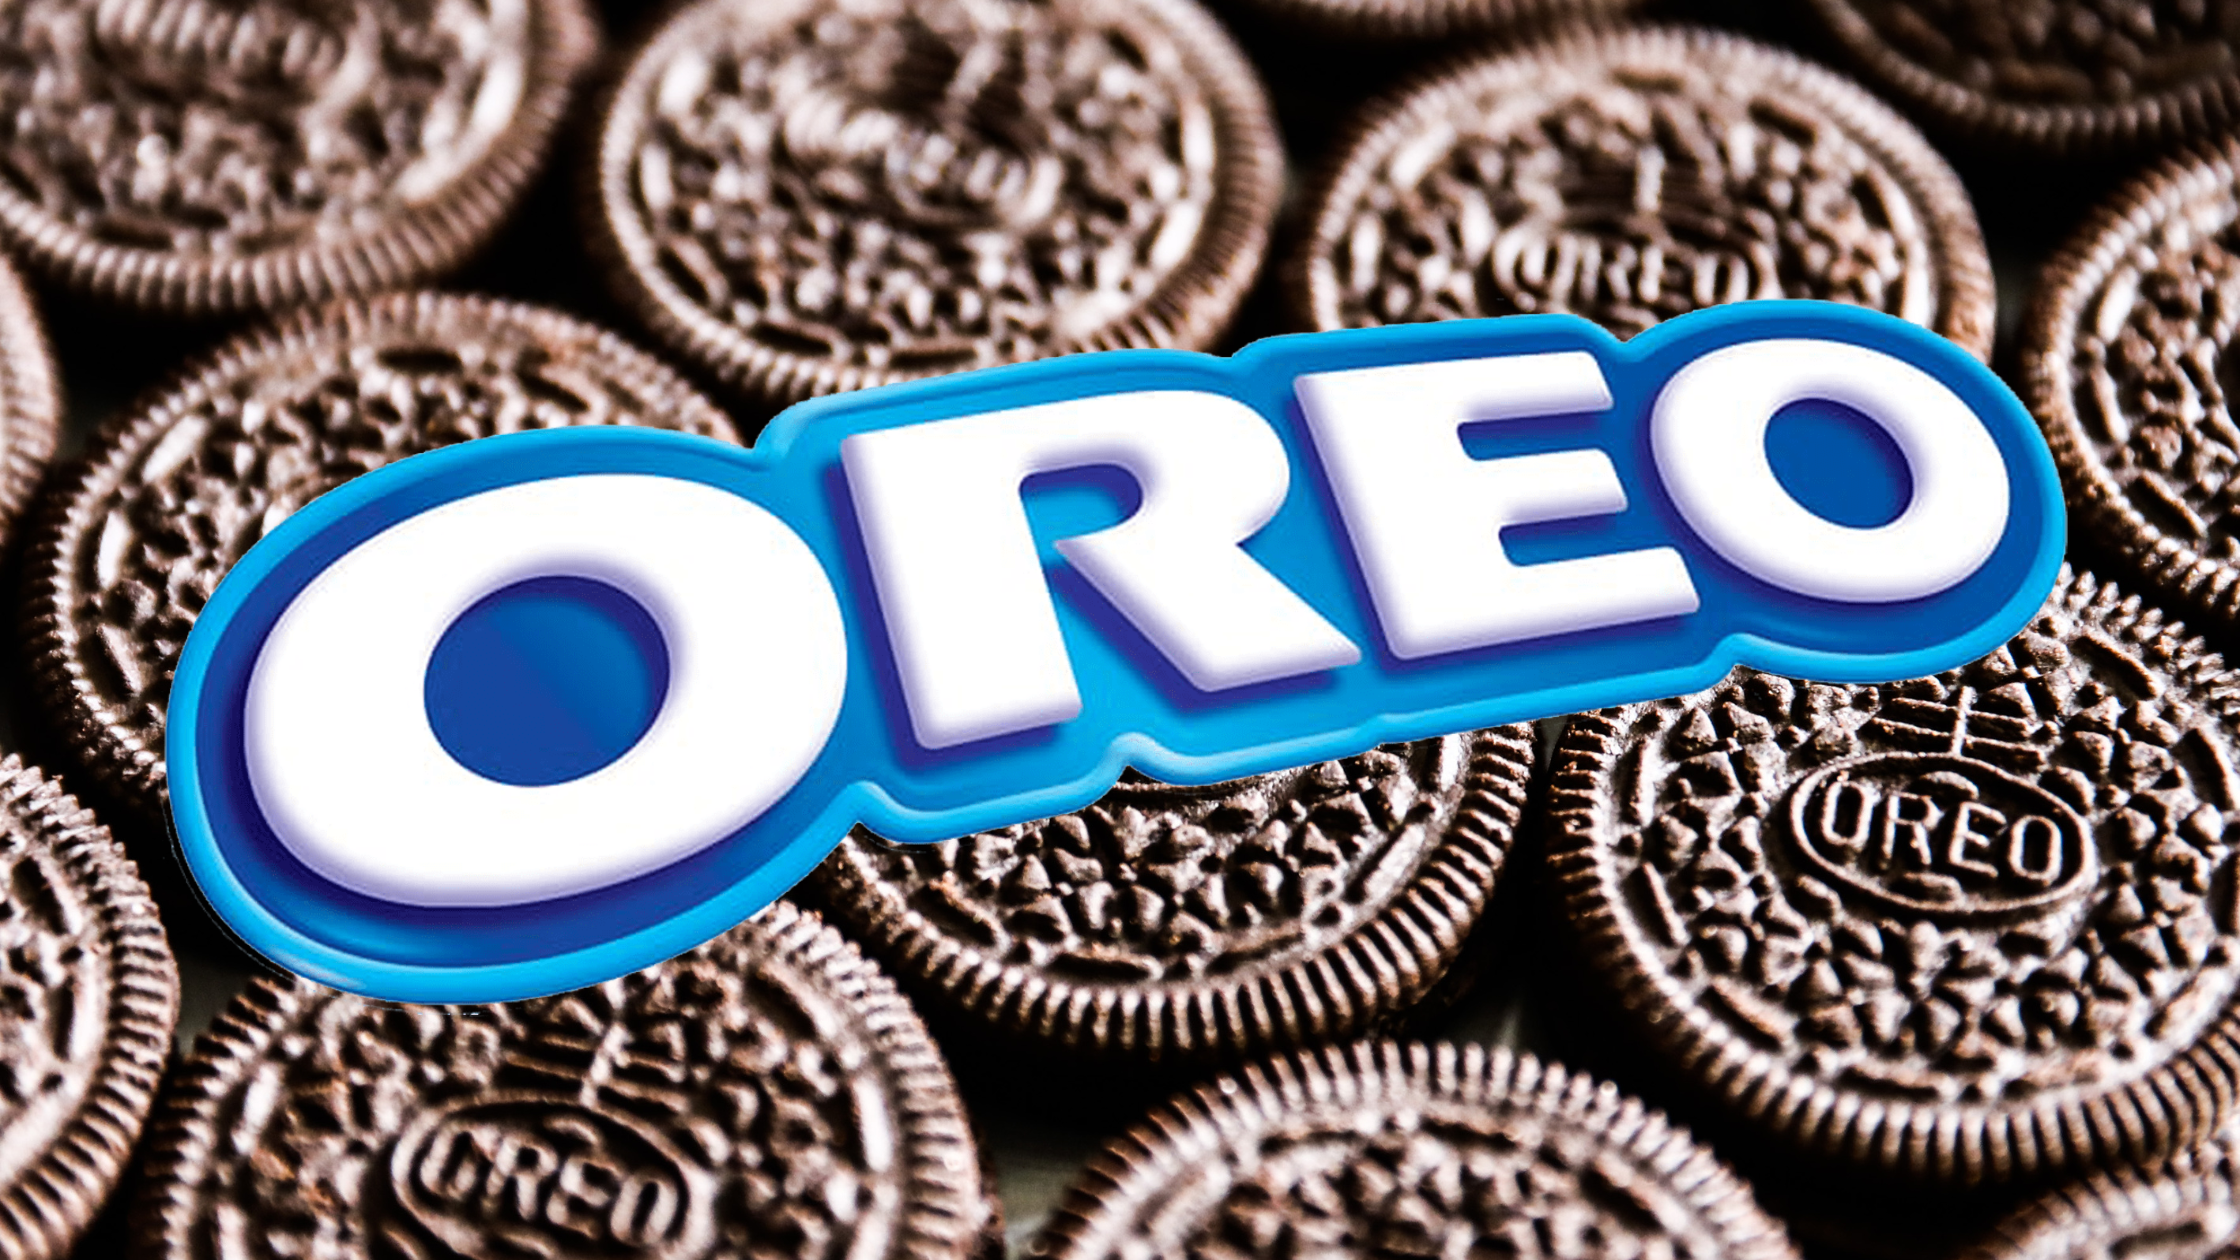 Now Discover Everything About Oreo Cookies And Much More